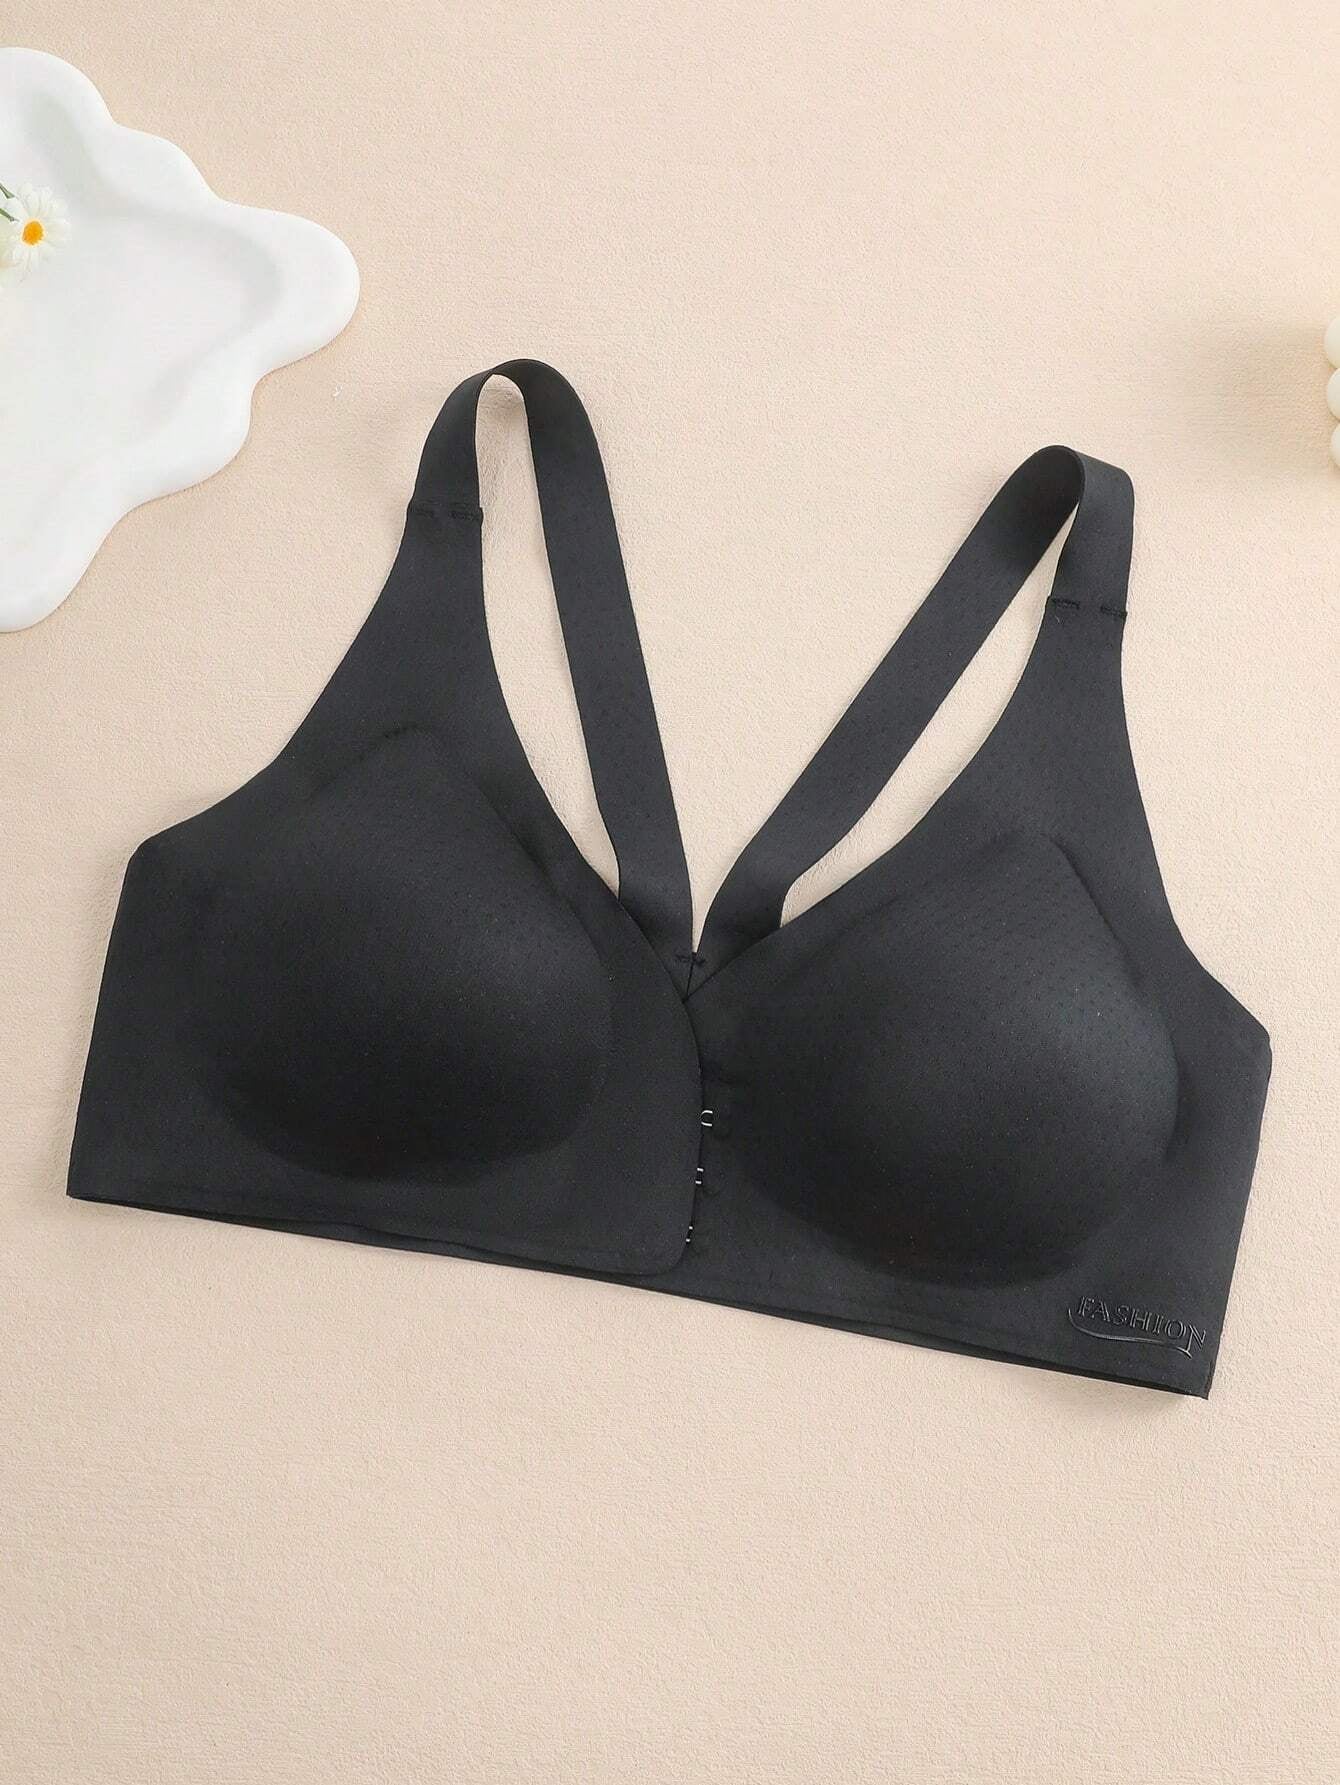 Seamless Bra For Women That Lift, Shape, And Provide Support With No Wires, 3-row Hook-and-eye Closure For Comfortable Fit Black